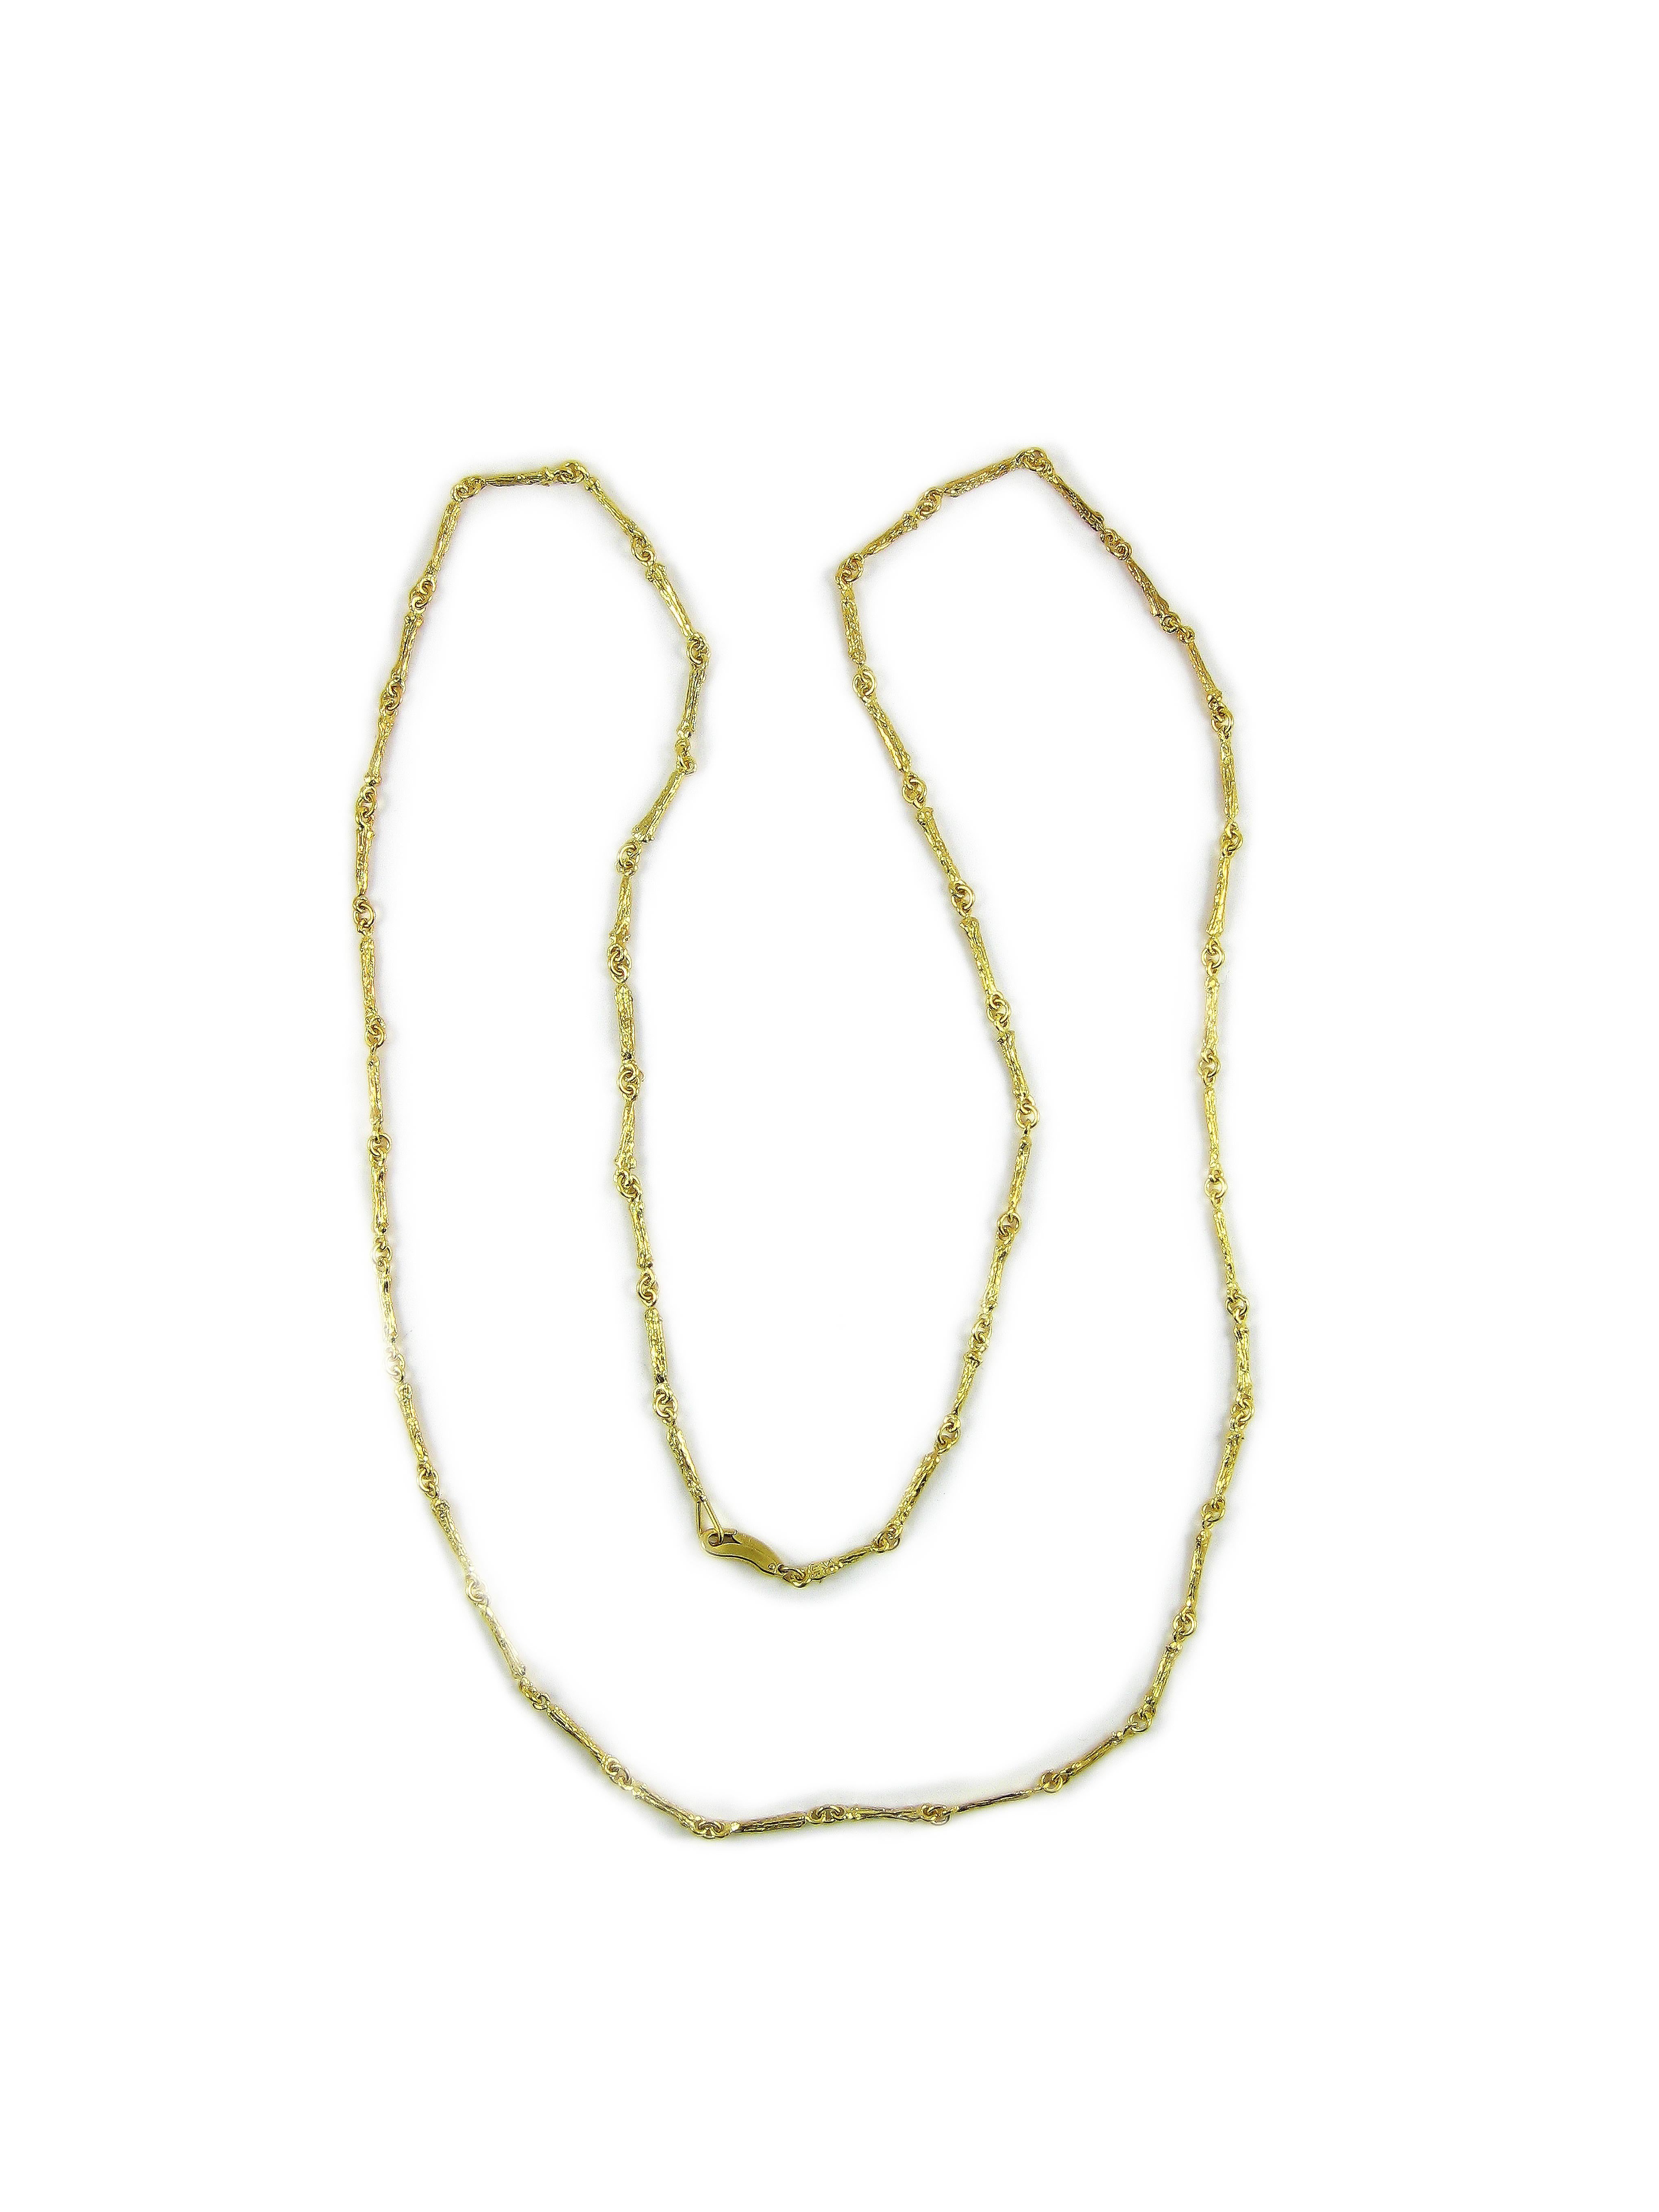 Twig Short Link Necklace in 18k Gold In New Condition For Sale In Solana Beach, CA